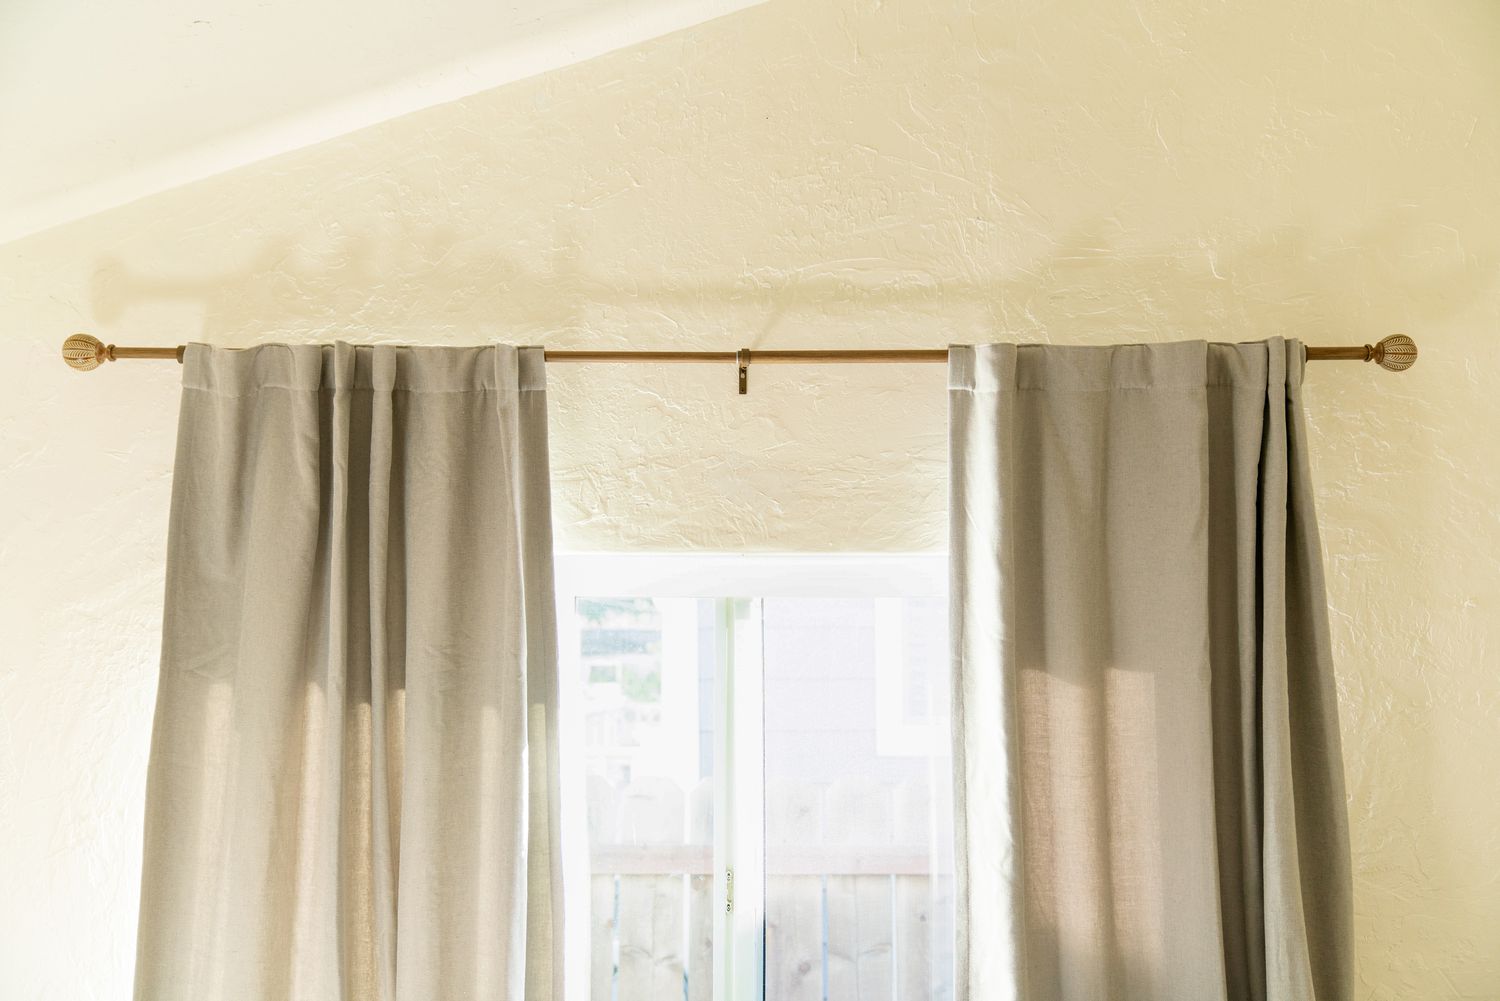 How High Should You Hang Curtains